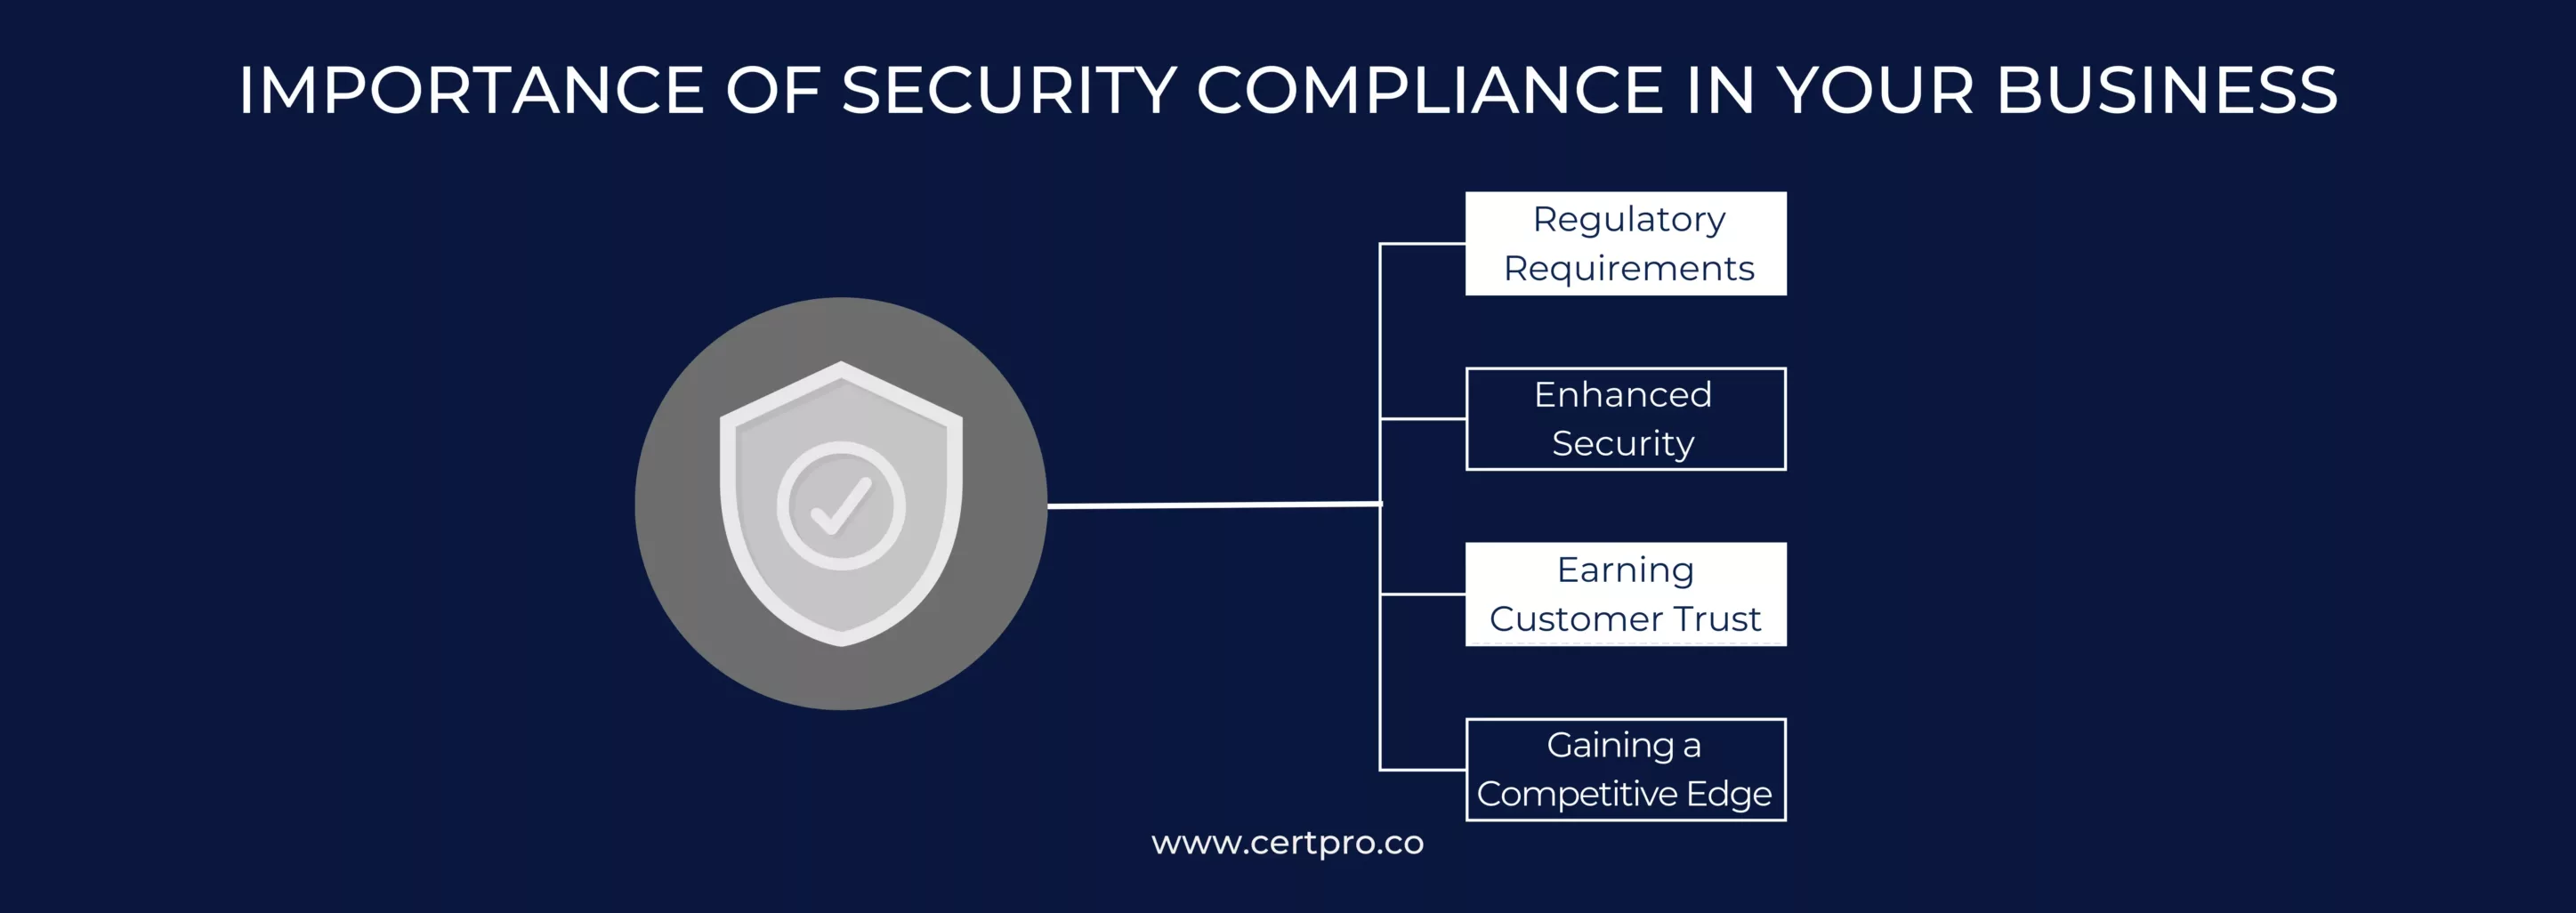 IMPORTANCE OF SECURITY COMPLIANCE IN YOUR BUSINESS